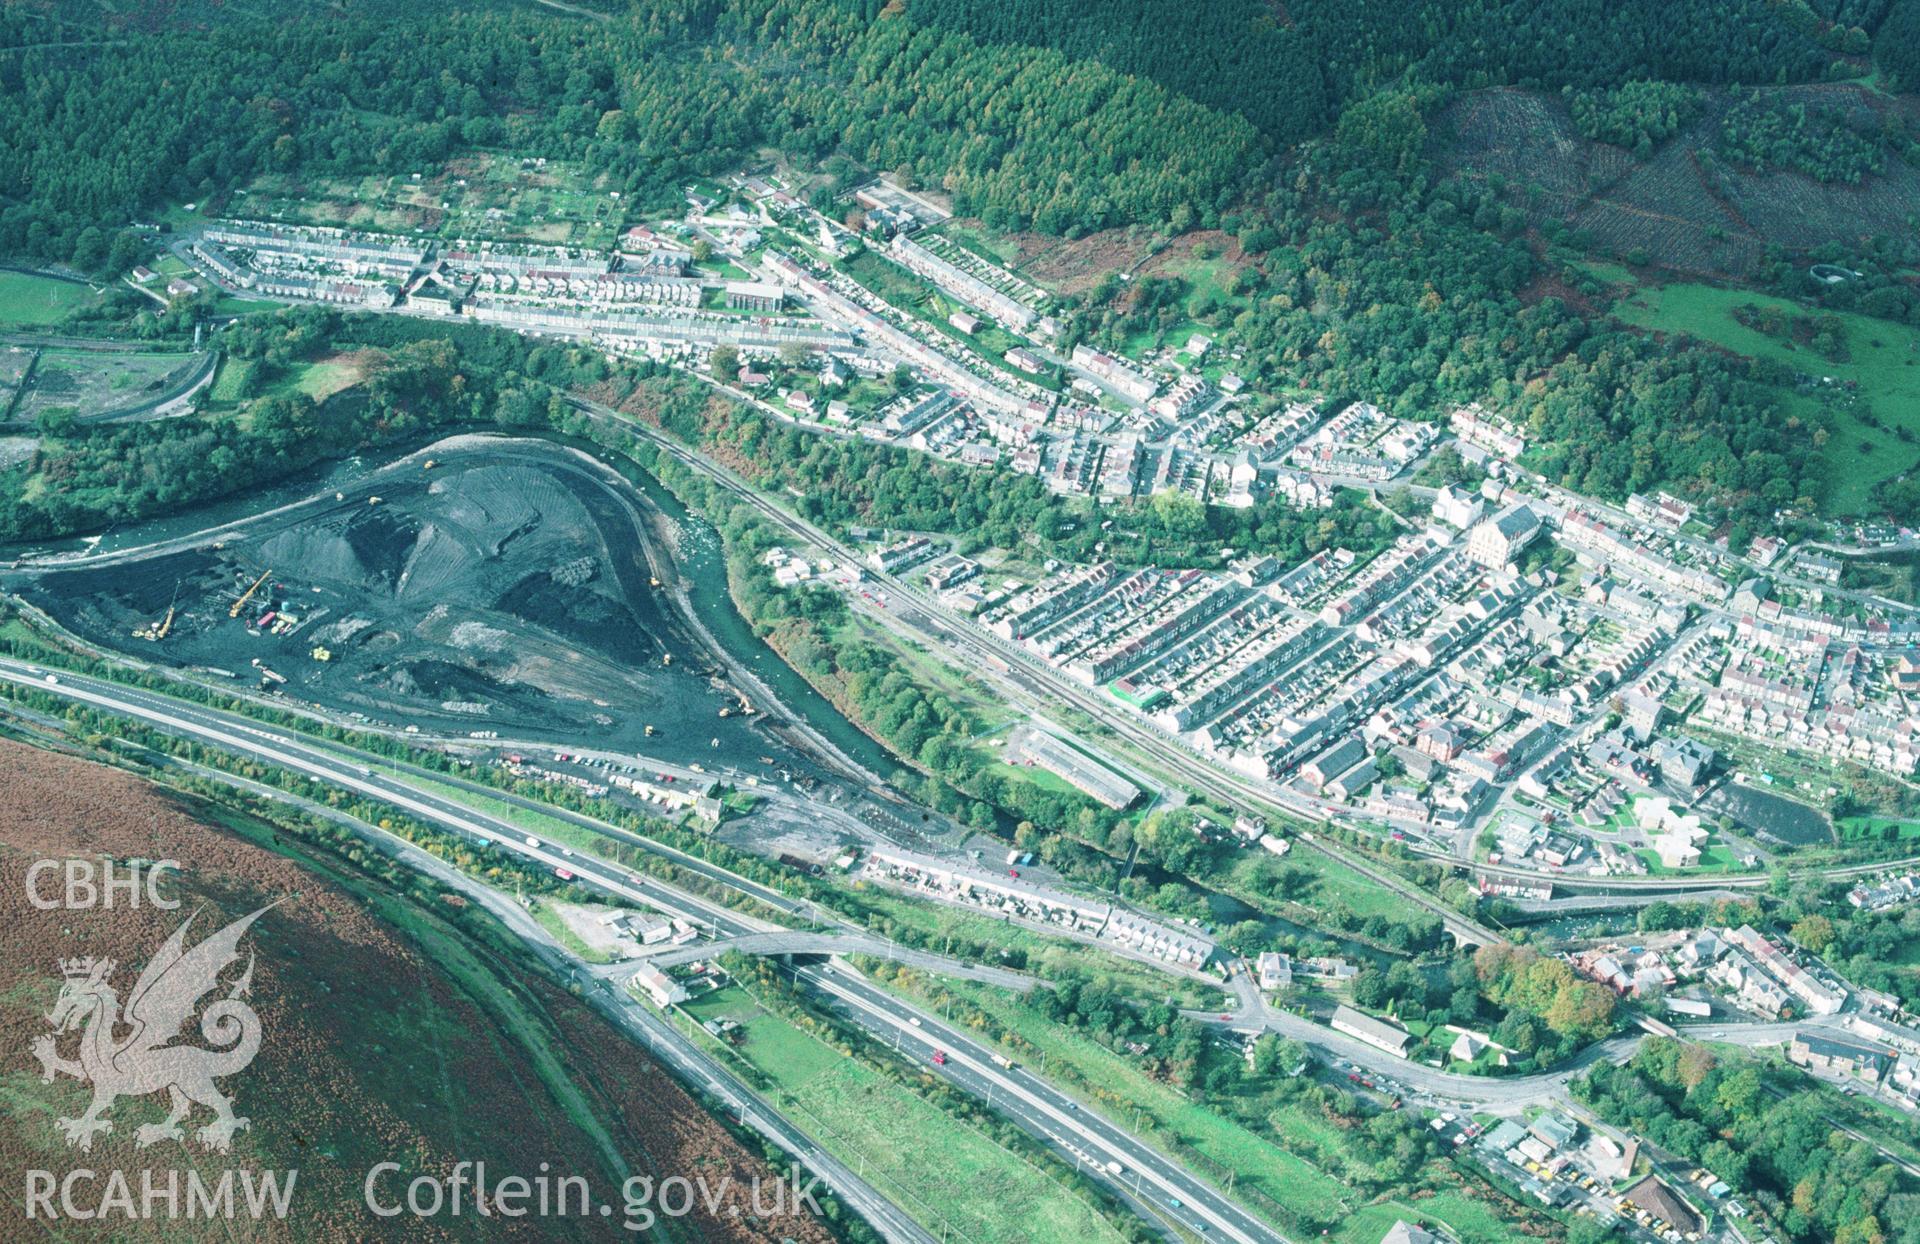 Slide of RCAHMW colour oblique aerial photograph of Abercynon Colliery, taken by C.R. Musson, 21/10/1992.